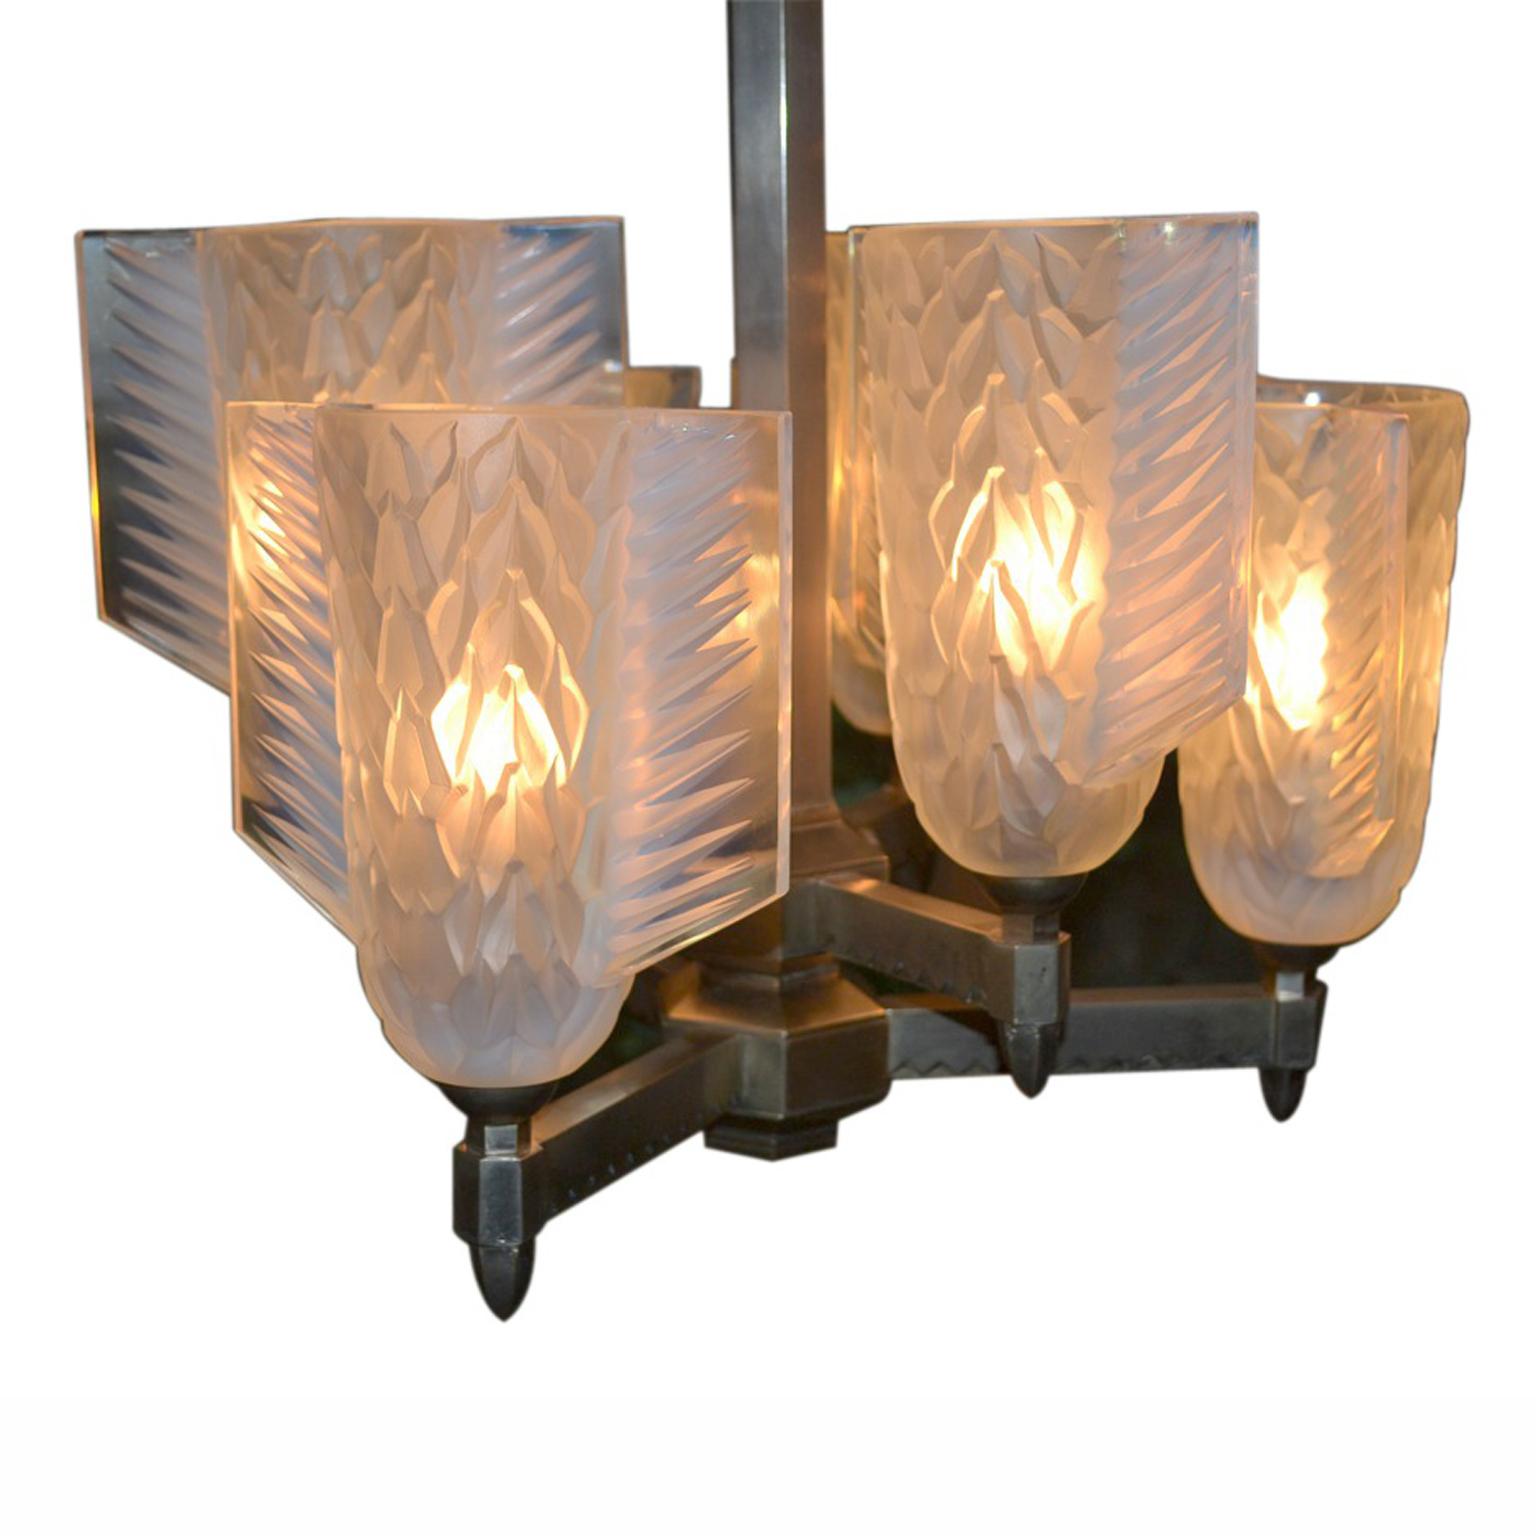 Cast Art Deco Chandelier with Frosted Glass   rrrow Quiver Shades by Pierre D'Avesn